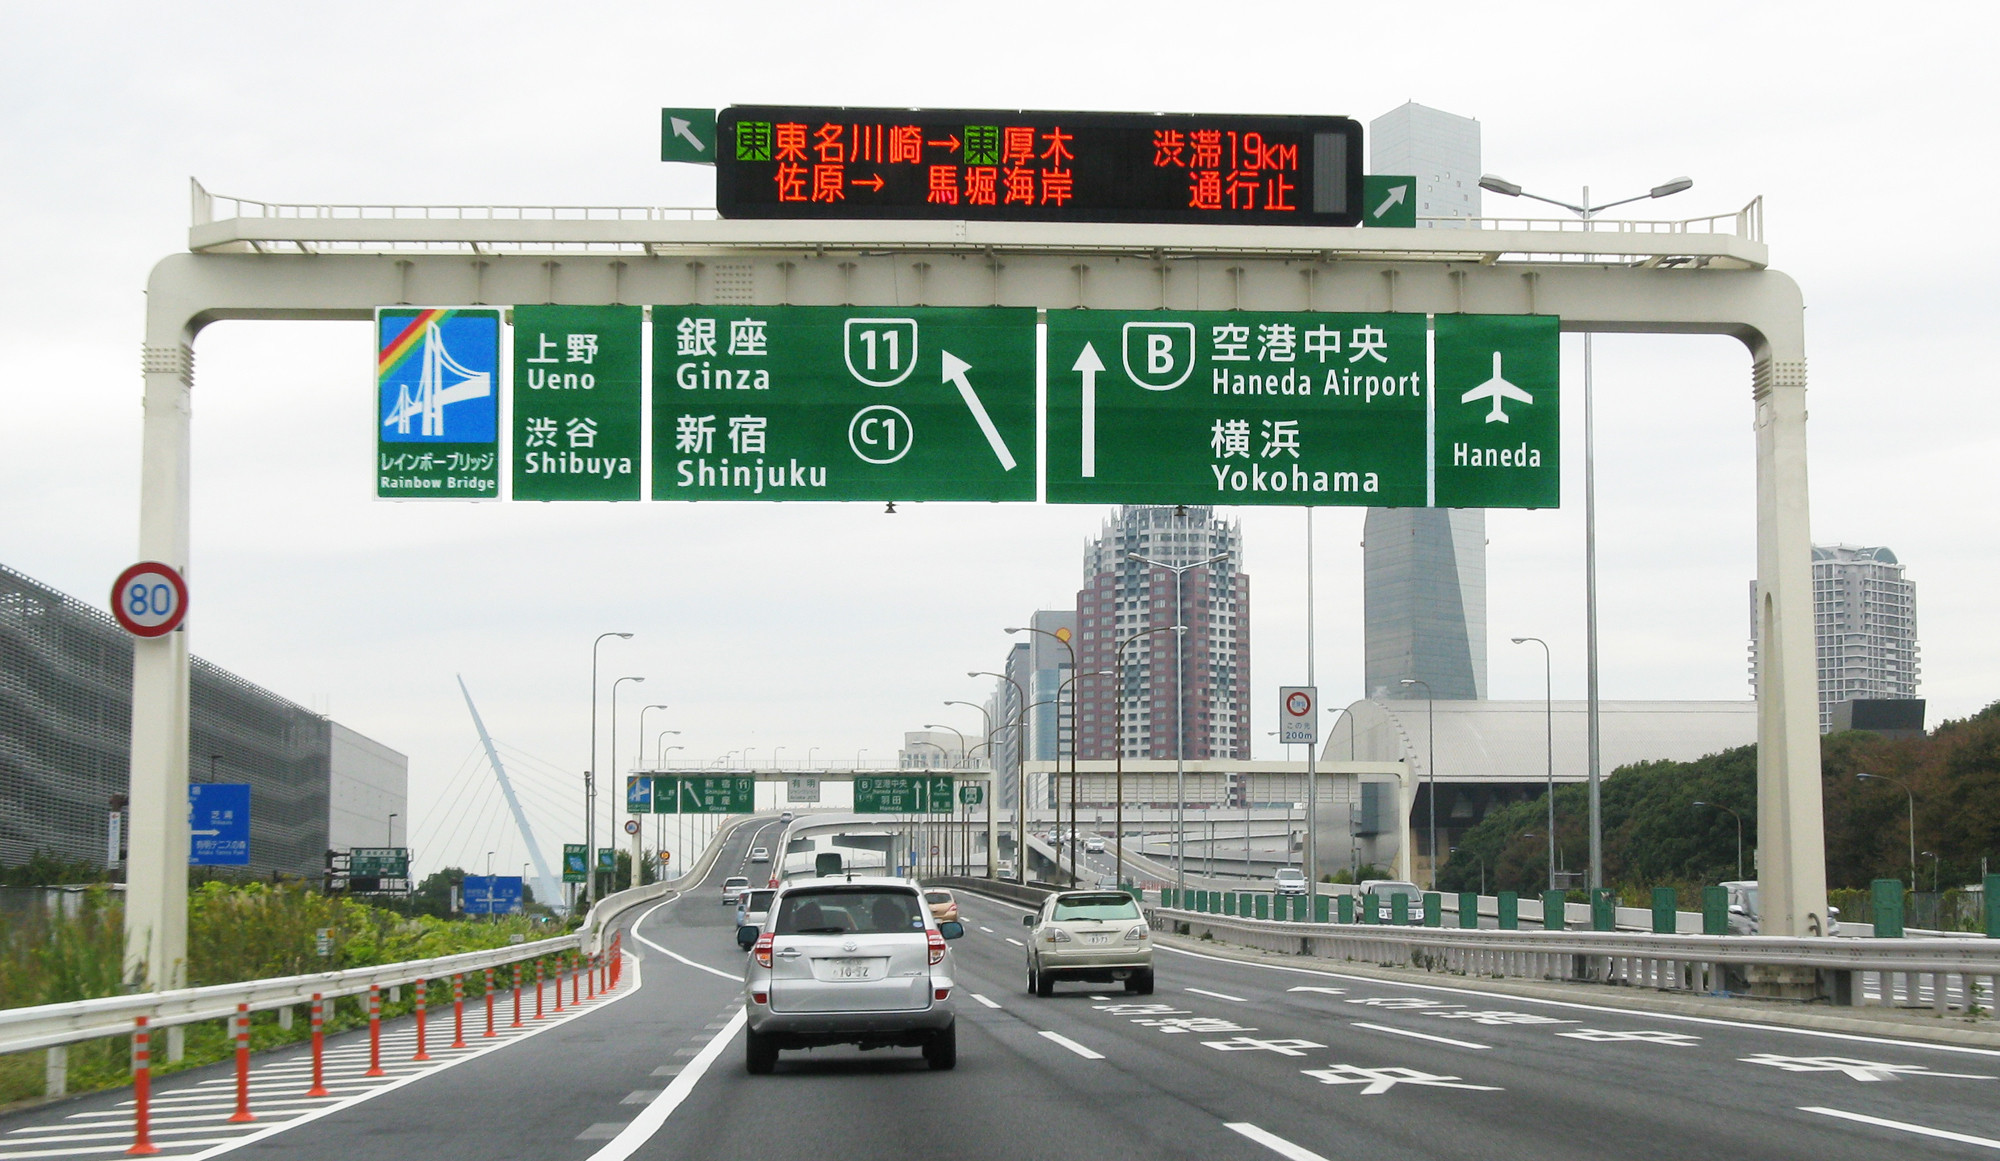 Tolls are to be increased for certain vehicles on the Tokyo Metropolitan Expressway during the Olympic and Paralympic Games next year ©Wikipedia